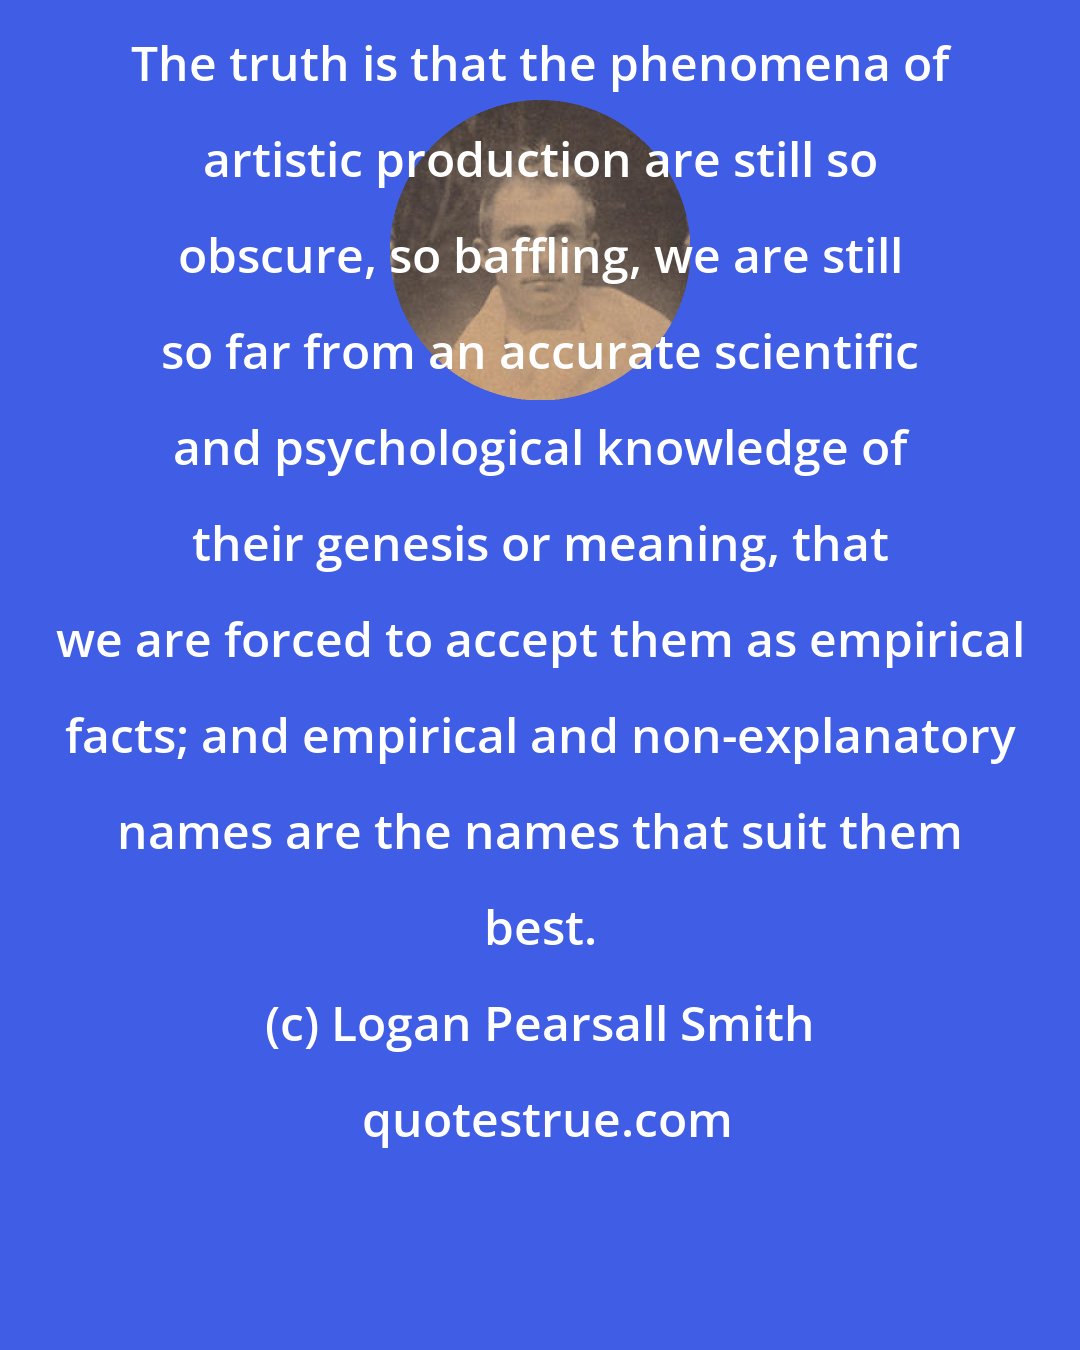 Logan Pearsall Smith: The truth is that the phenomena of artistic production are still so obscure, so baffling, we are still so far from an accurate scientific and psychological knowledge of their genesis or meaning, that we are forced to accept them as empirical facts; and empirical and non-explanatory names are the names that suit them best.